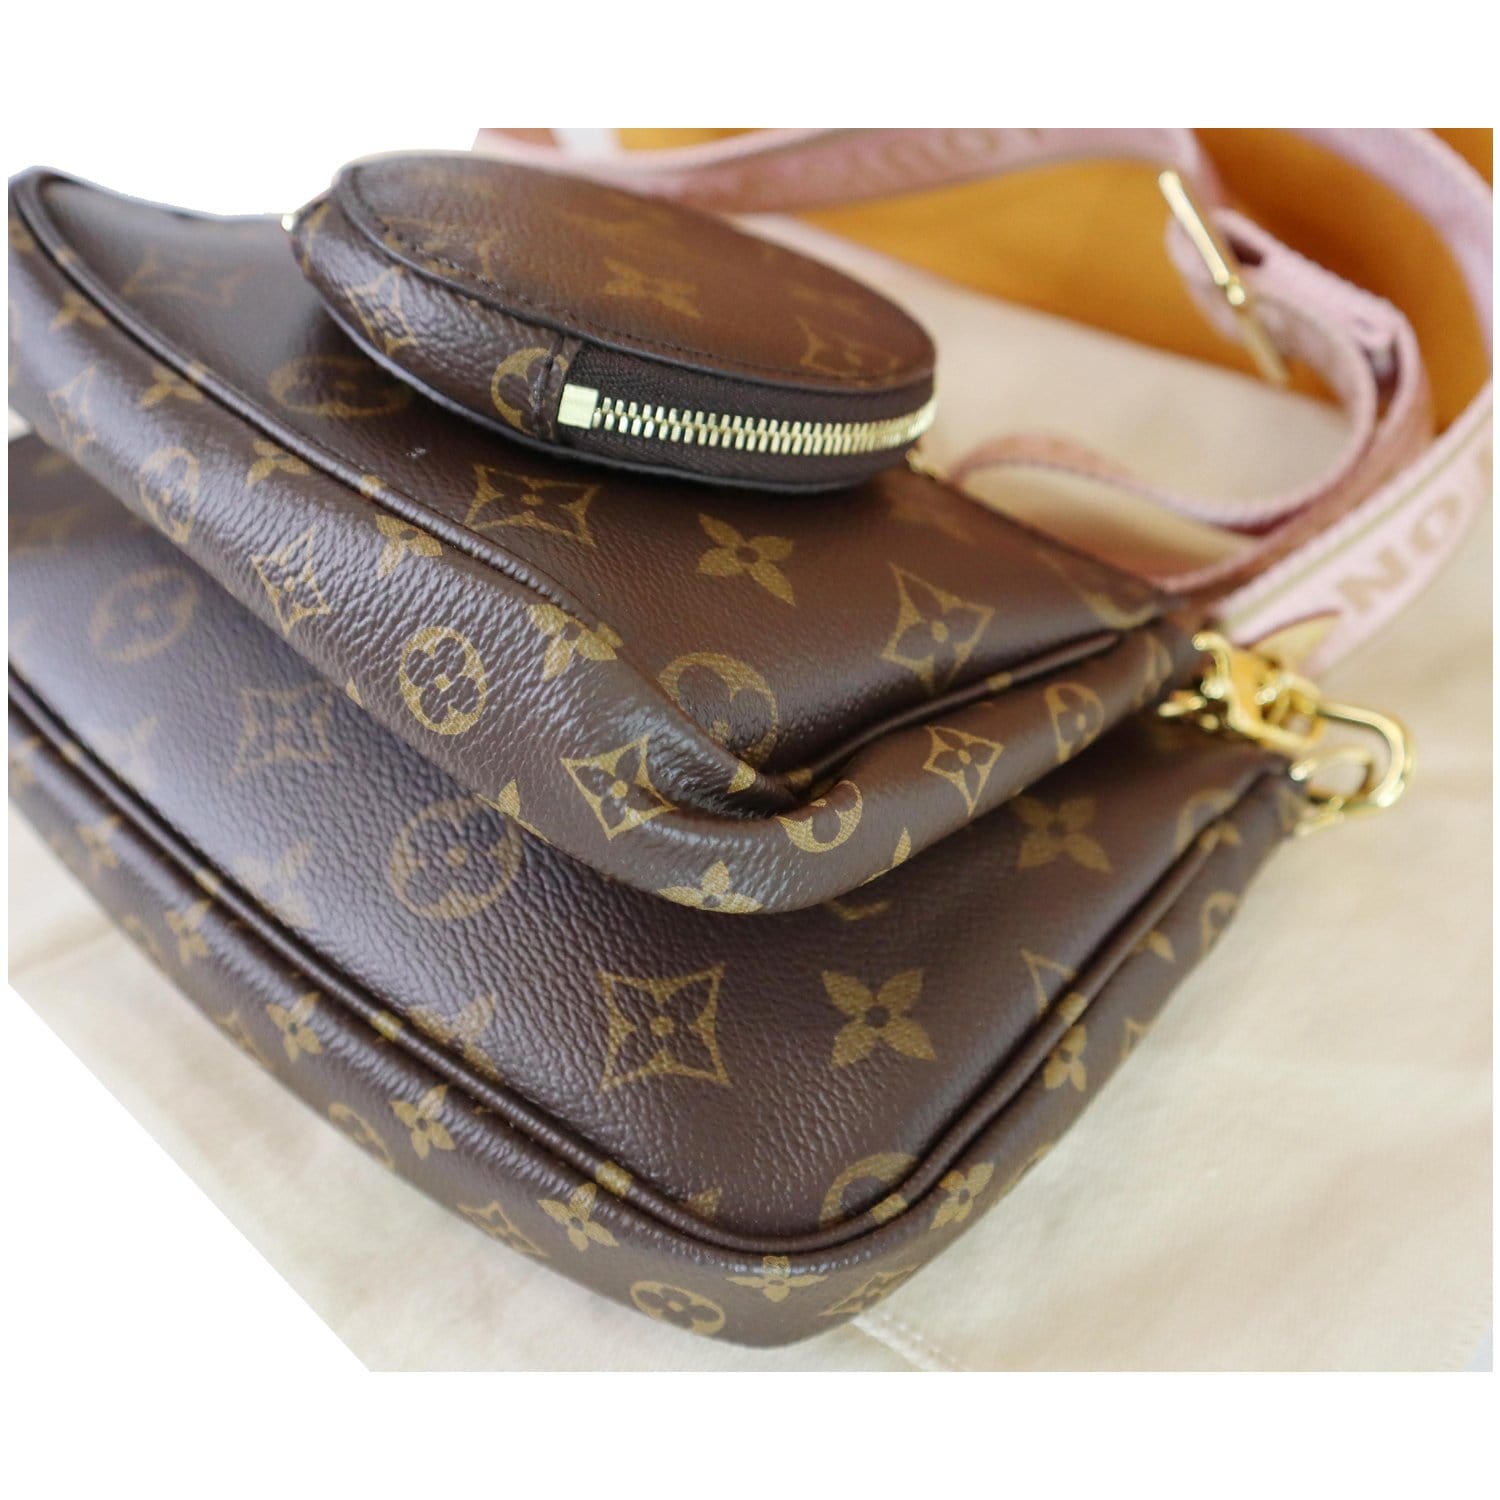 crossover bag with coin purse louis vuitton